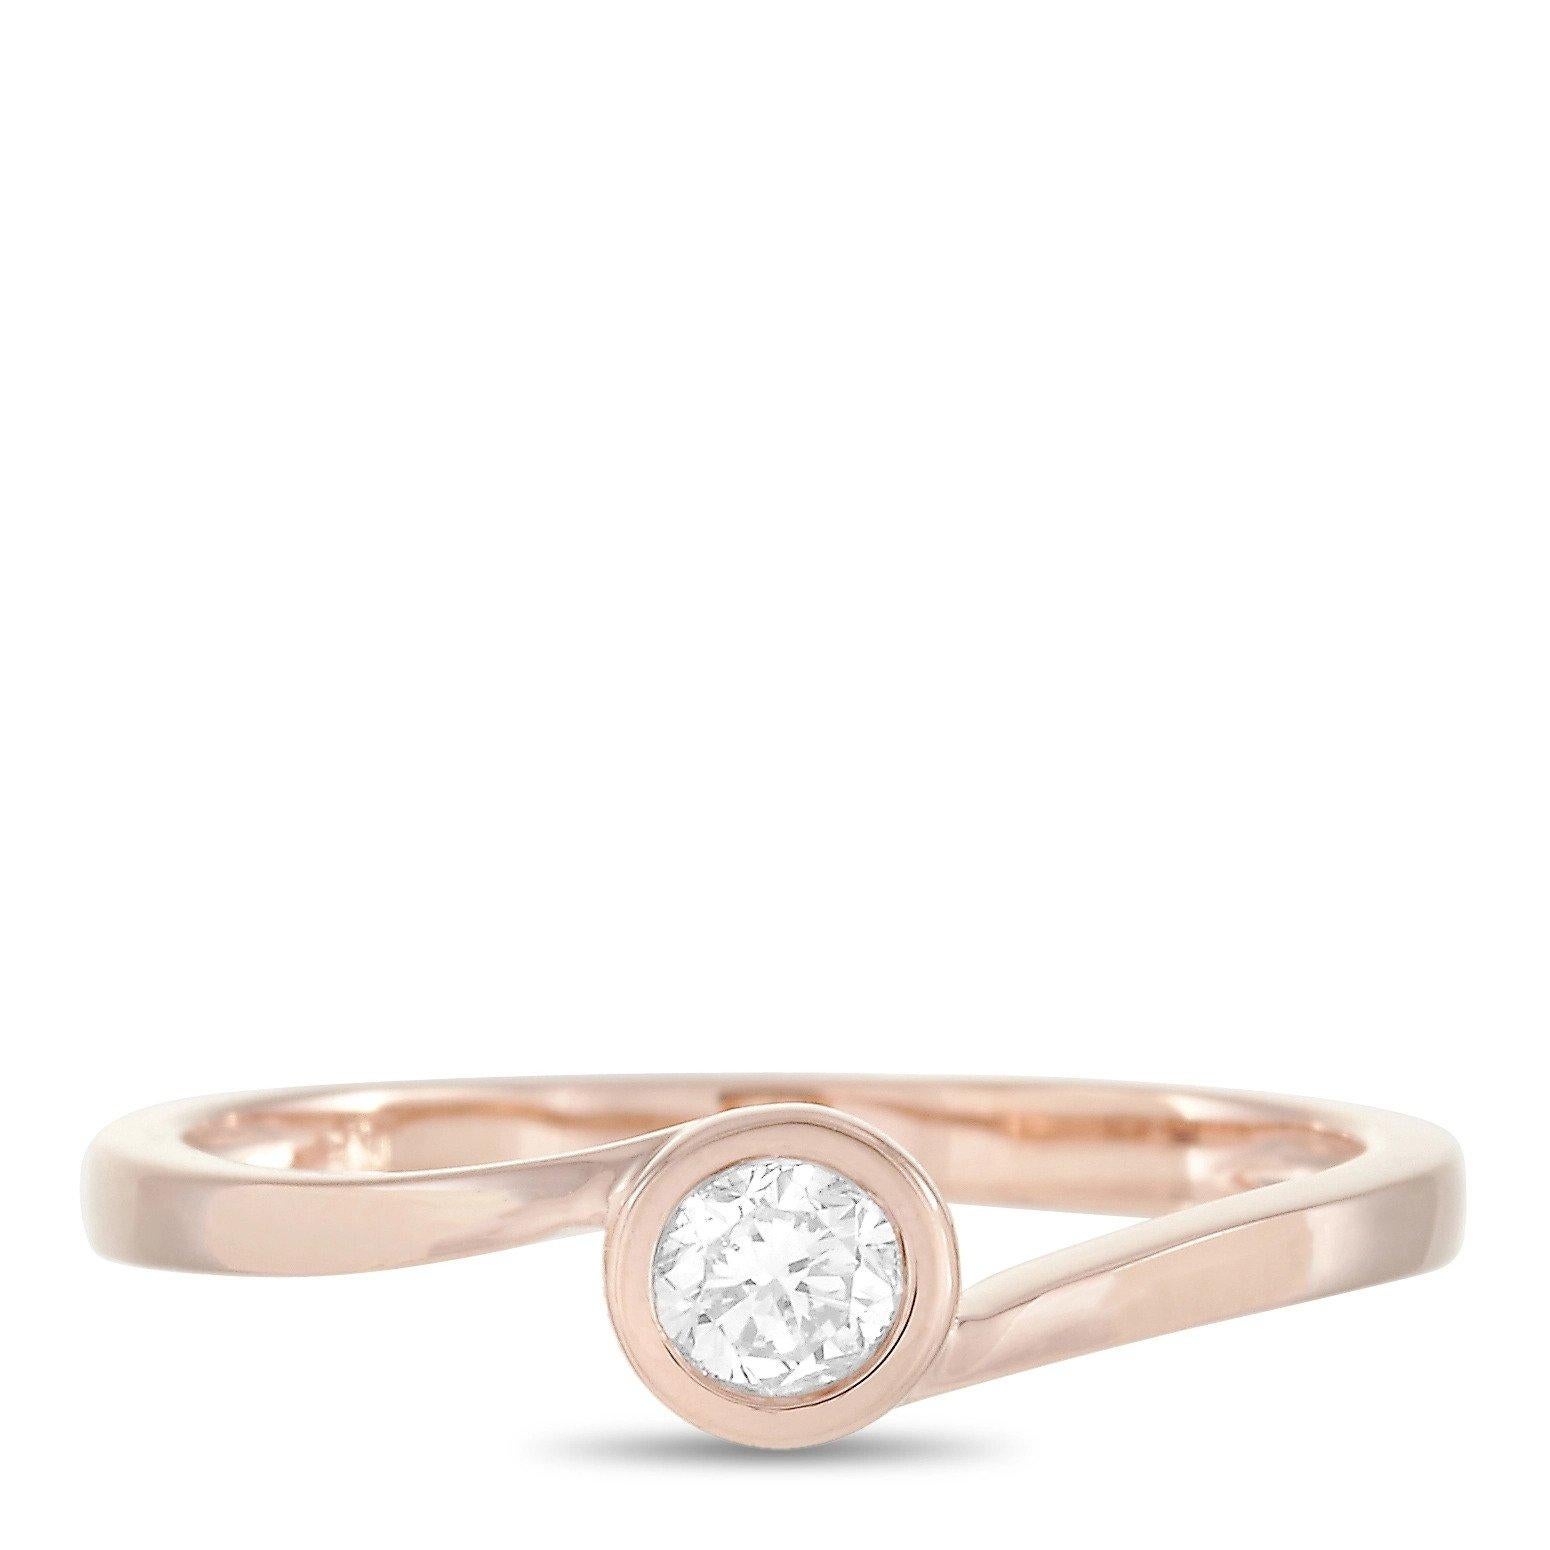 LB Exclusive 14K Rose Gold 0.26 Ct Diamond Ring In New Condition For Sale In Southampton, PA